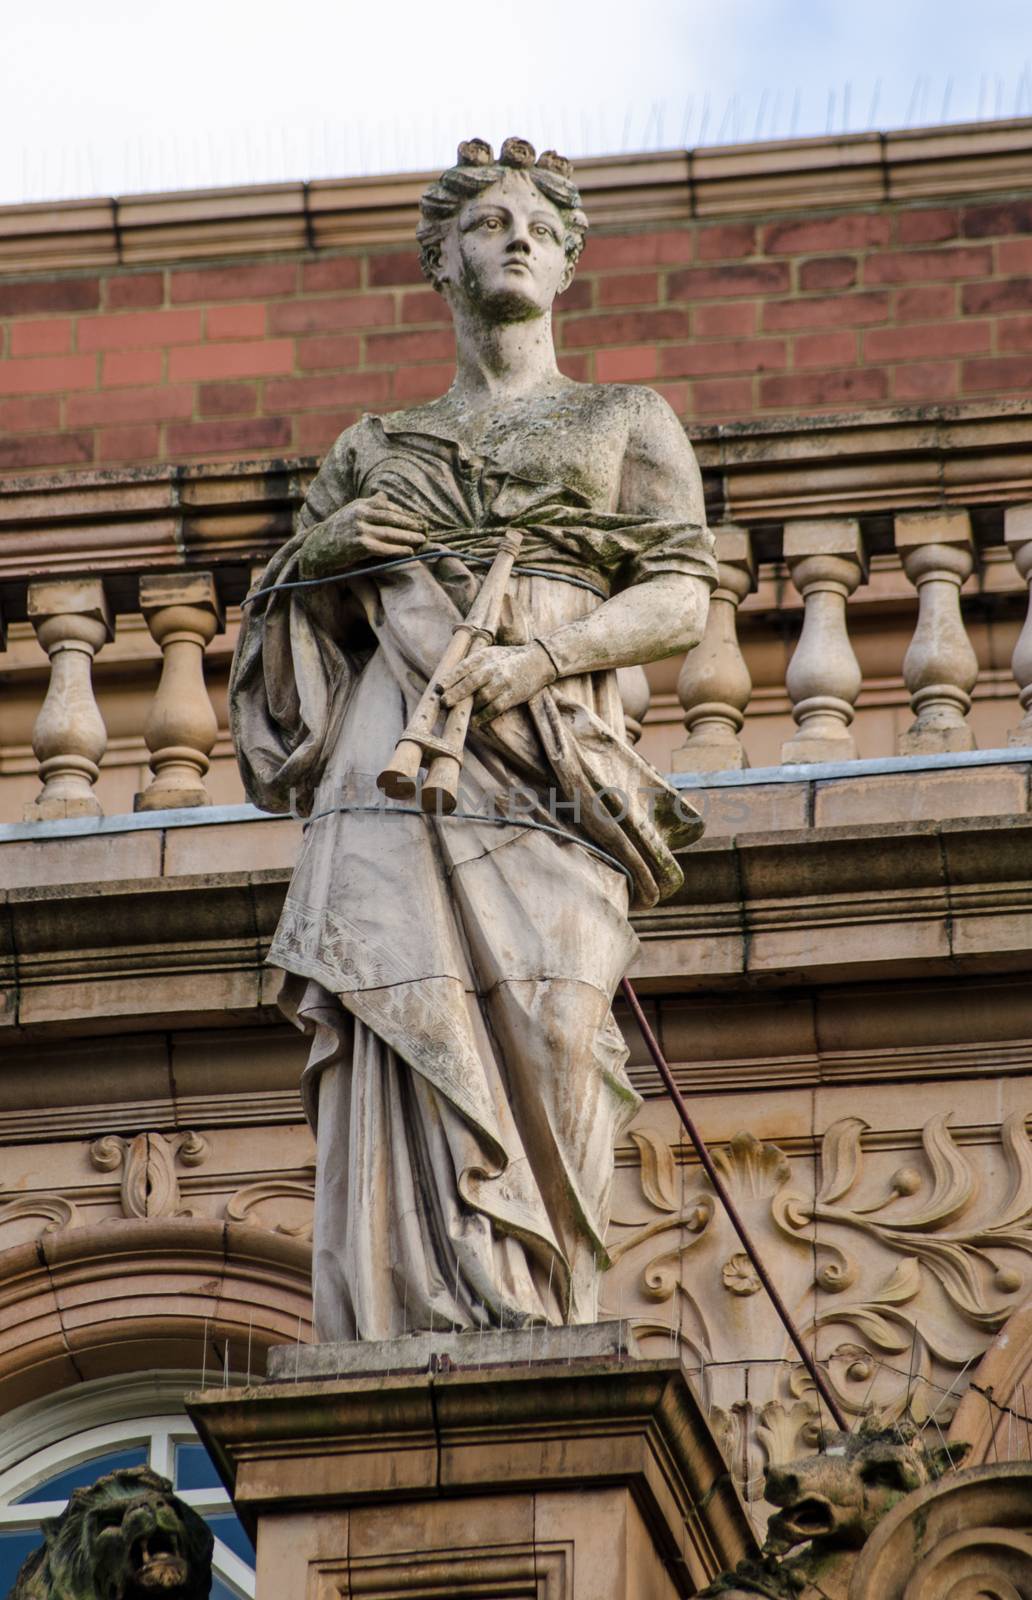 Victorian statue of the Greek Muse of music Euterpe on the exterior of Richmond Theatre.  The building was designed by Frank Matcham and opened in 1899.  